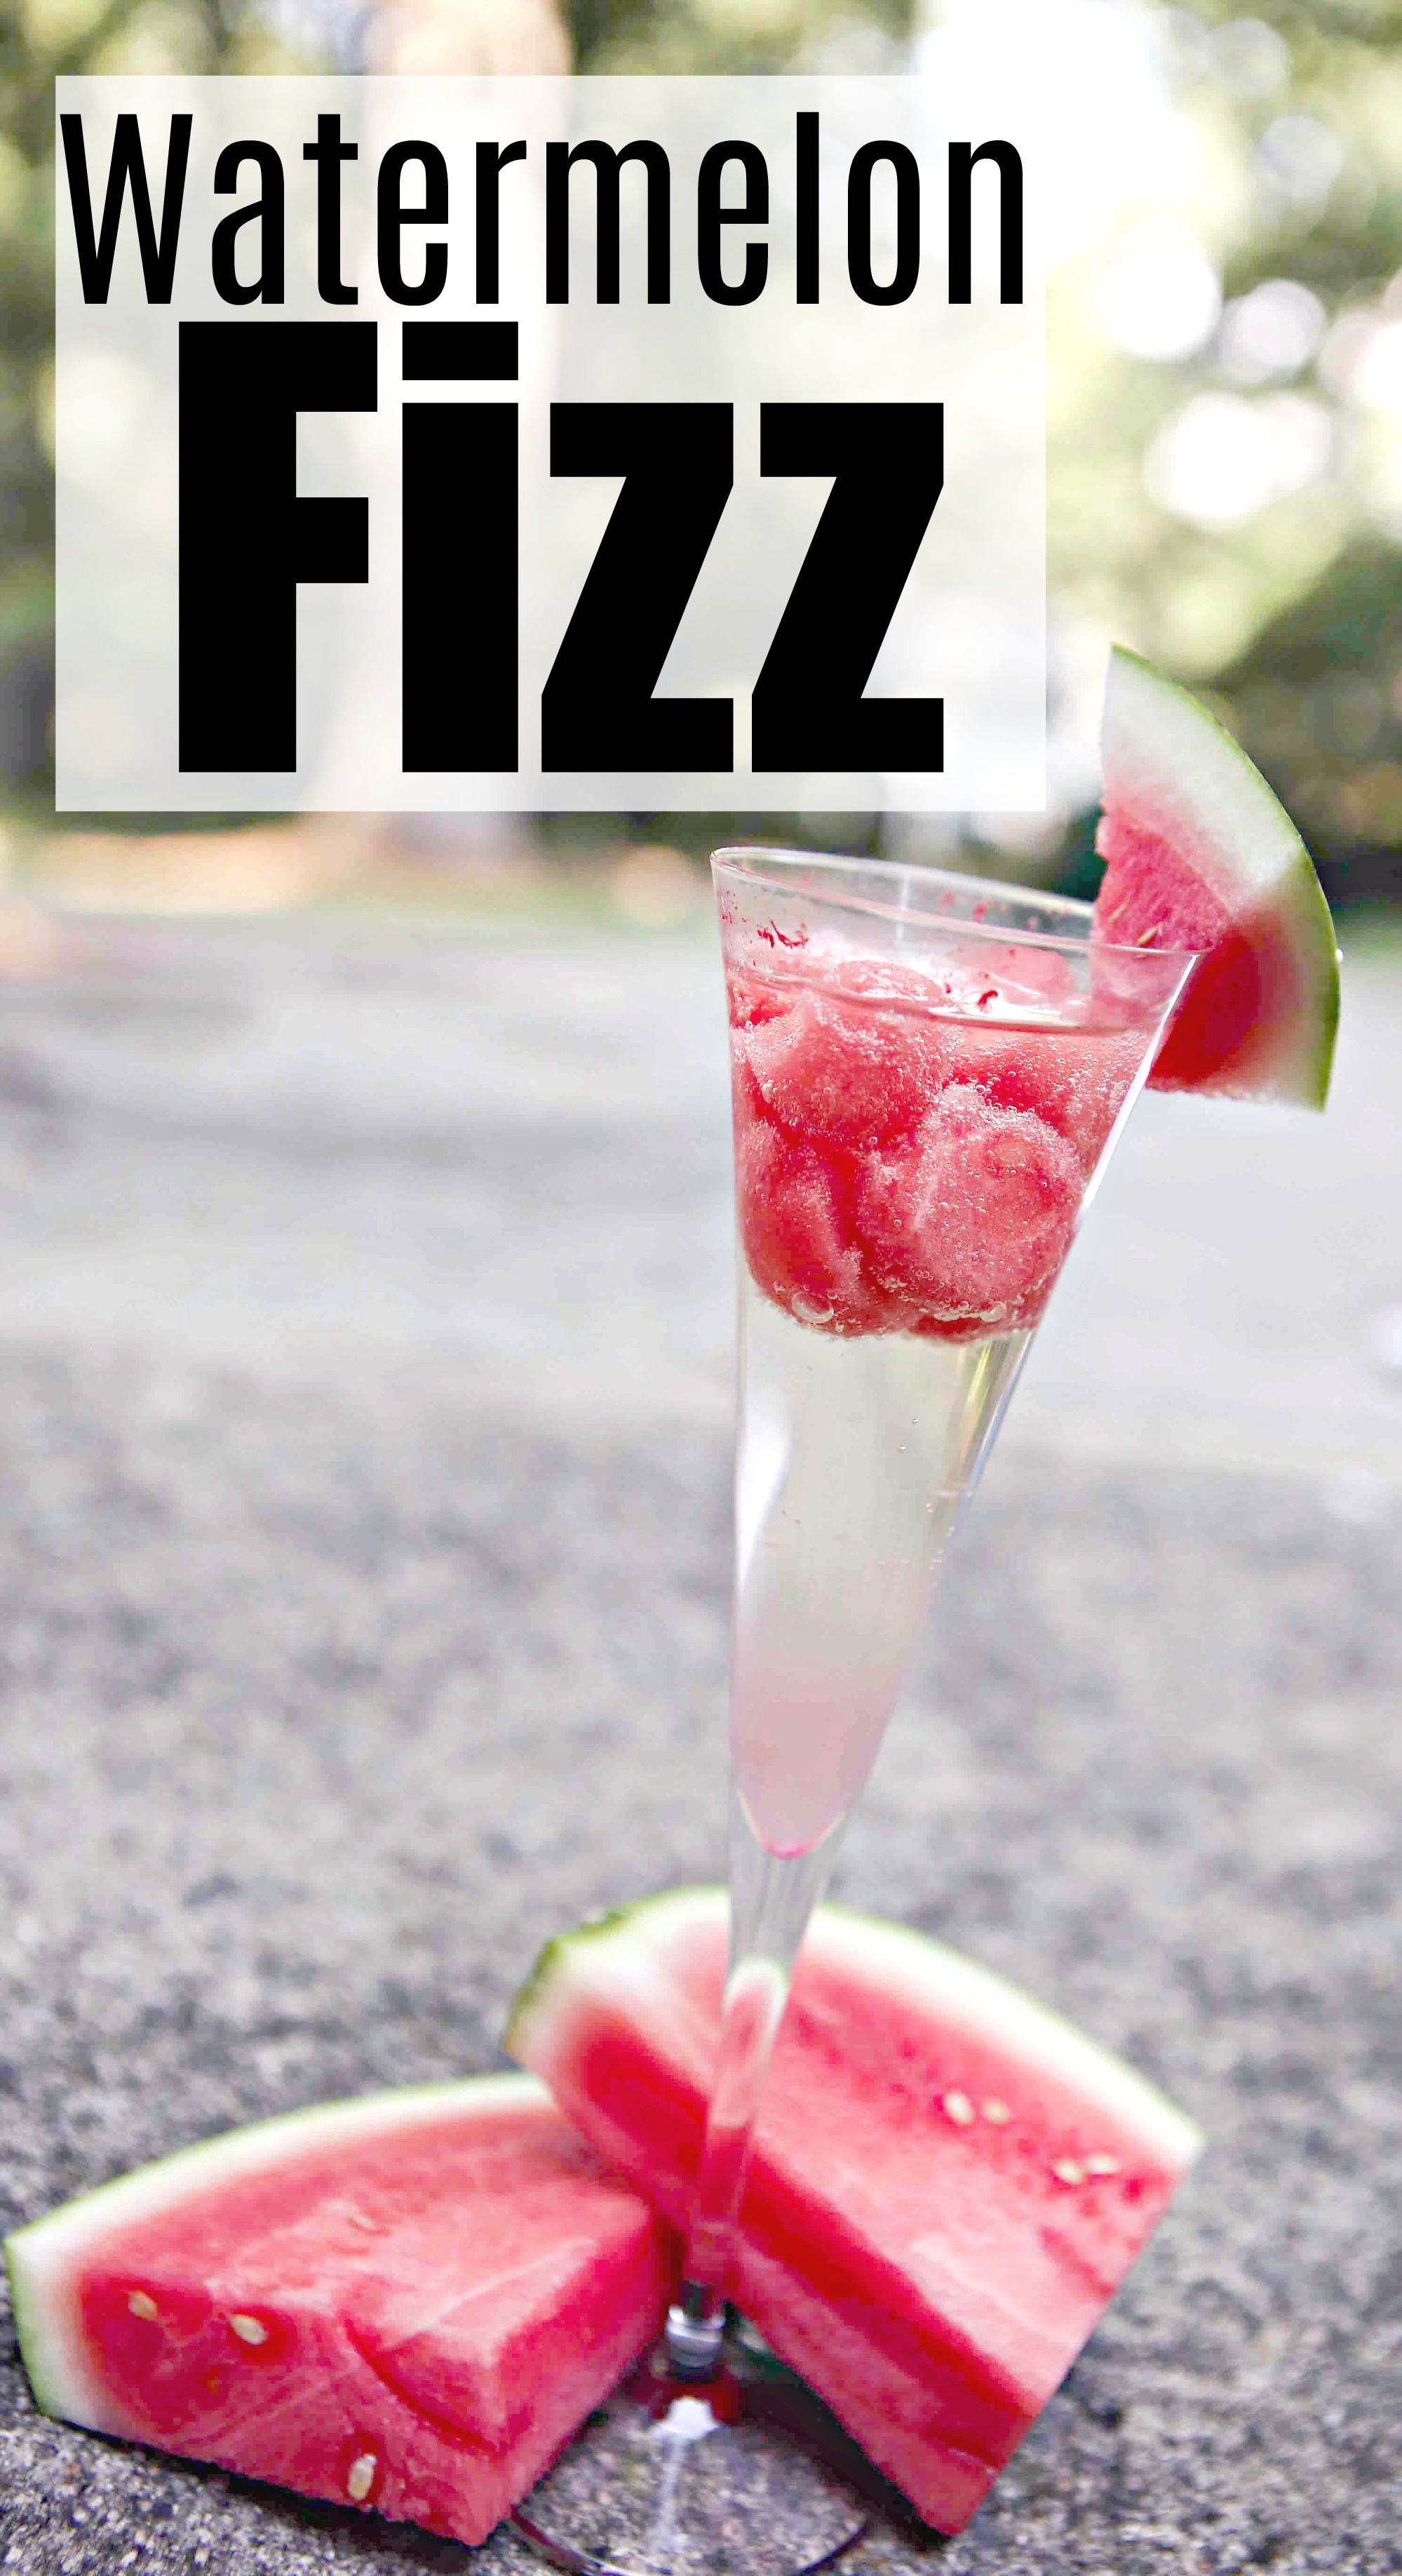 The Best Watermelon Cocktail Recipe : The Refreshing Watermelon Fizz by Atlanta blogger 